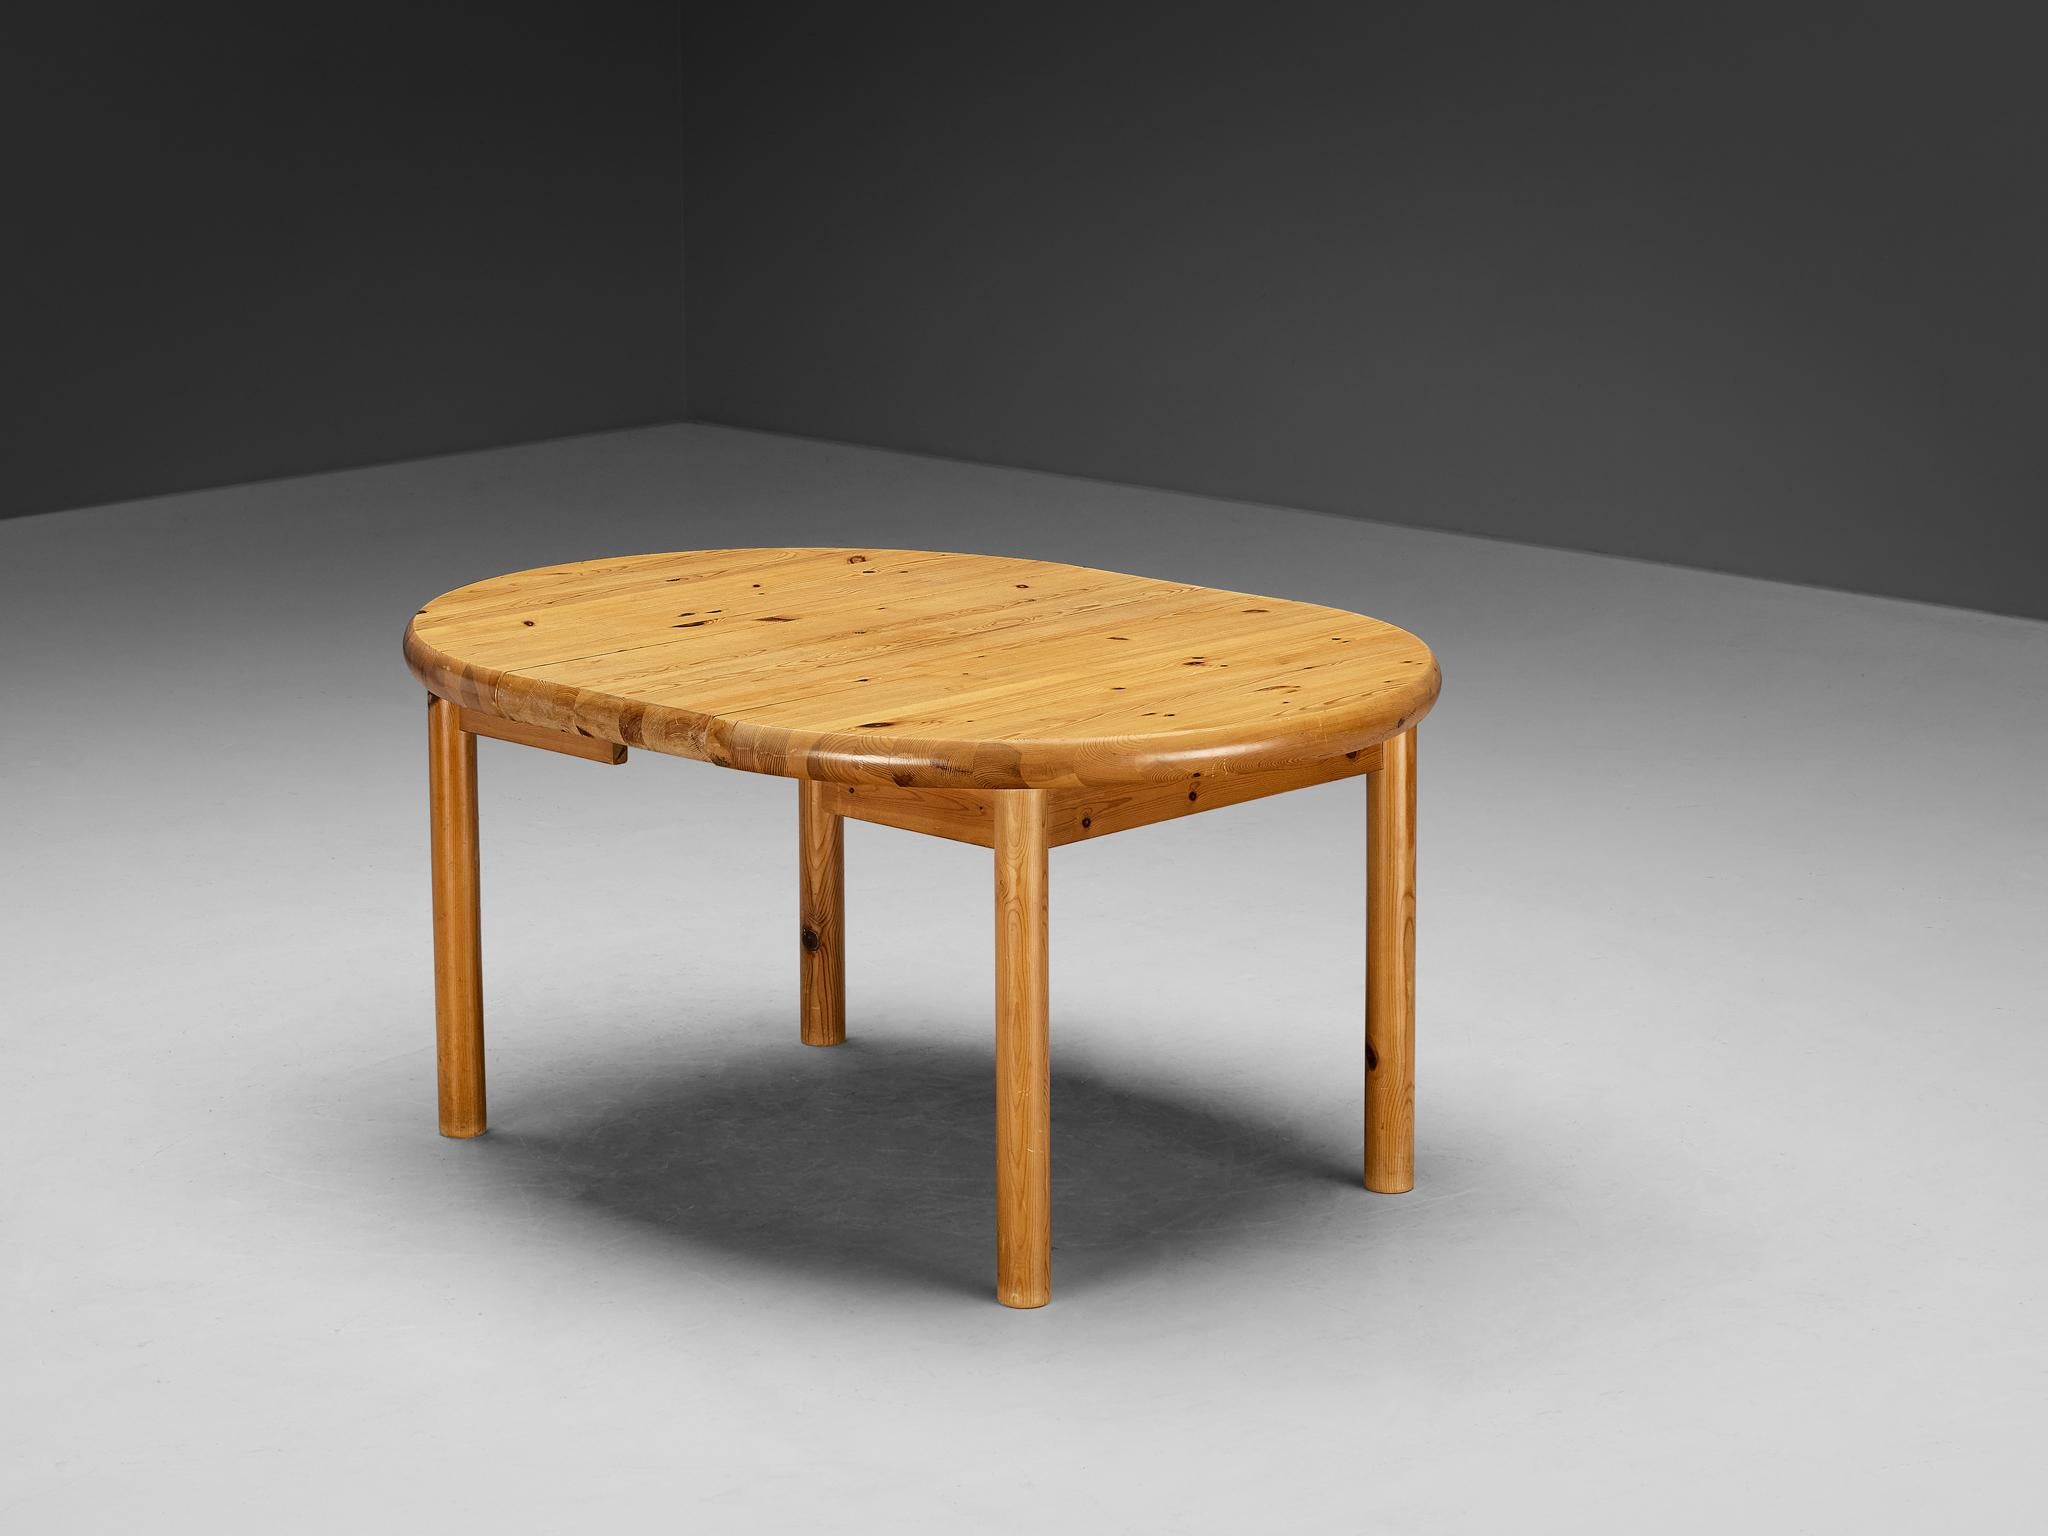 Rainer Daumiller, extendable dining table, pine, Denmark, 1970s.

Robust dining table in solid pine, designed by Rainer Daumiller. A functional design that features a rounded tabletop when not extended and an oval top when one leaf is added to the